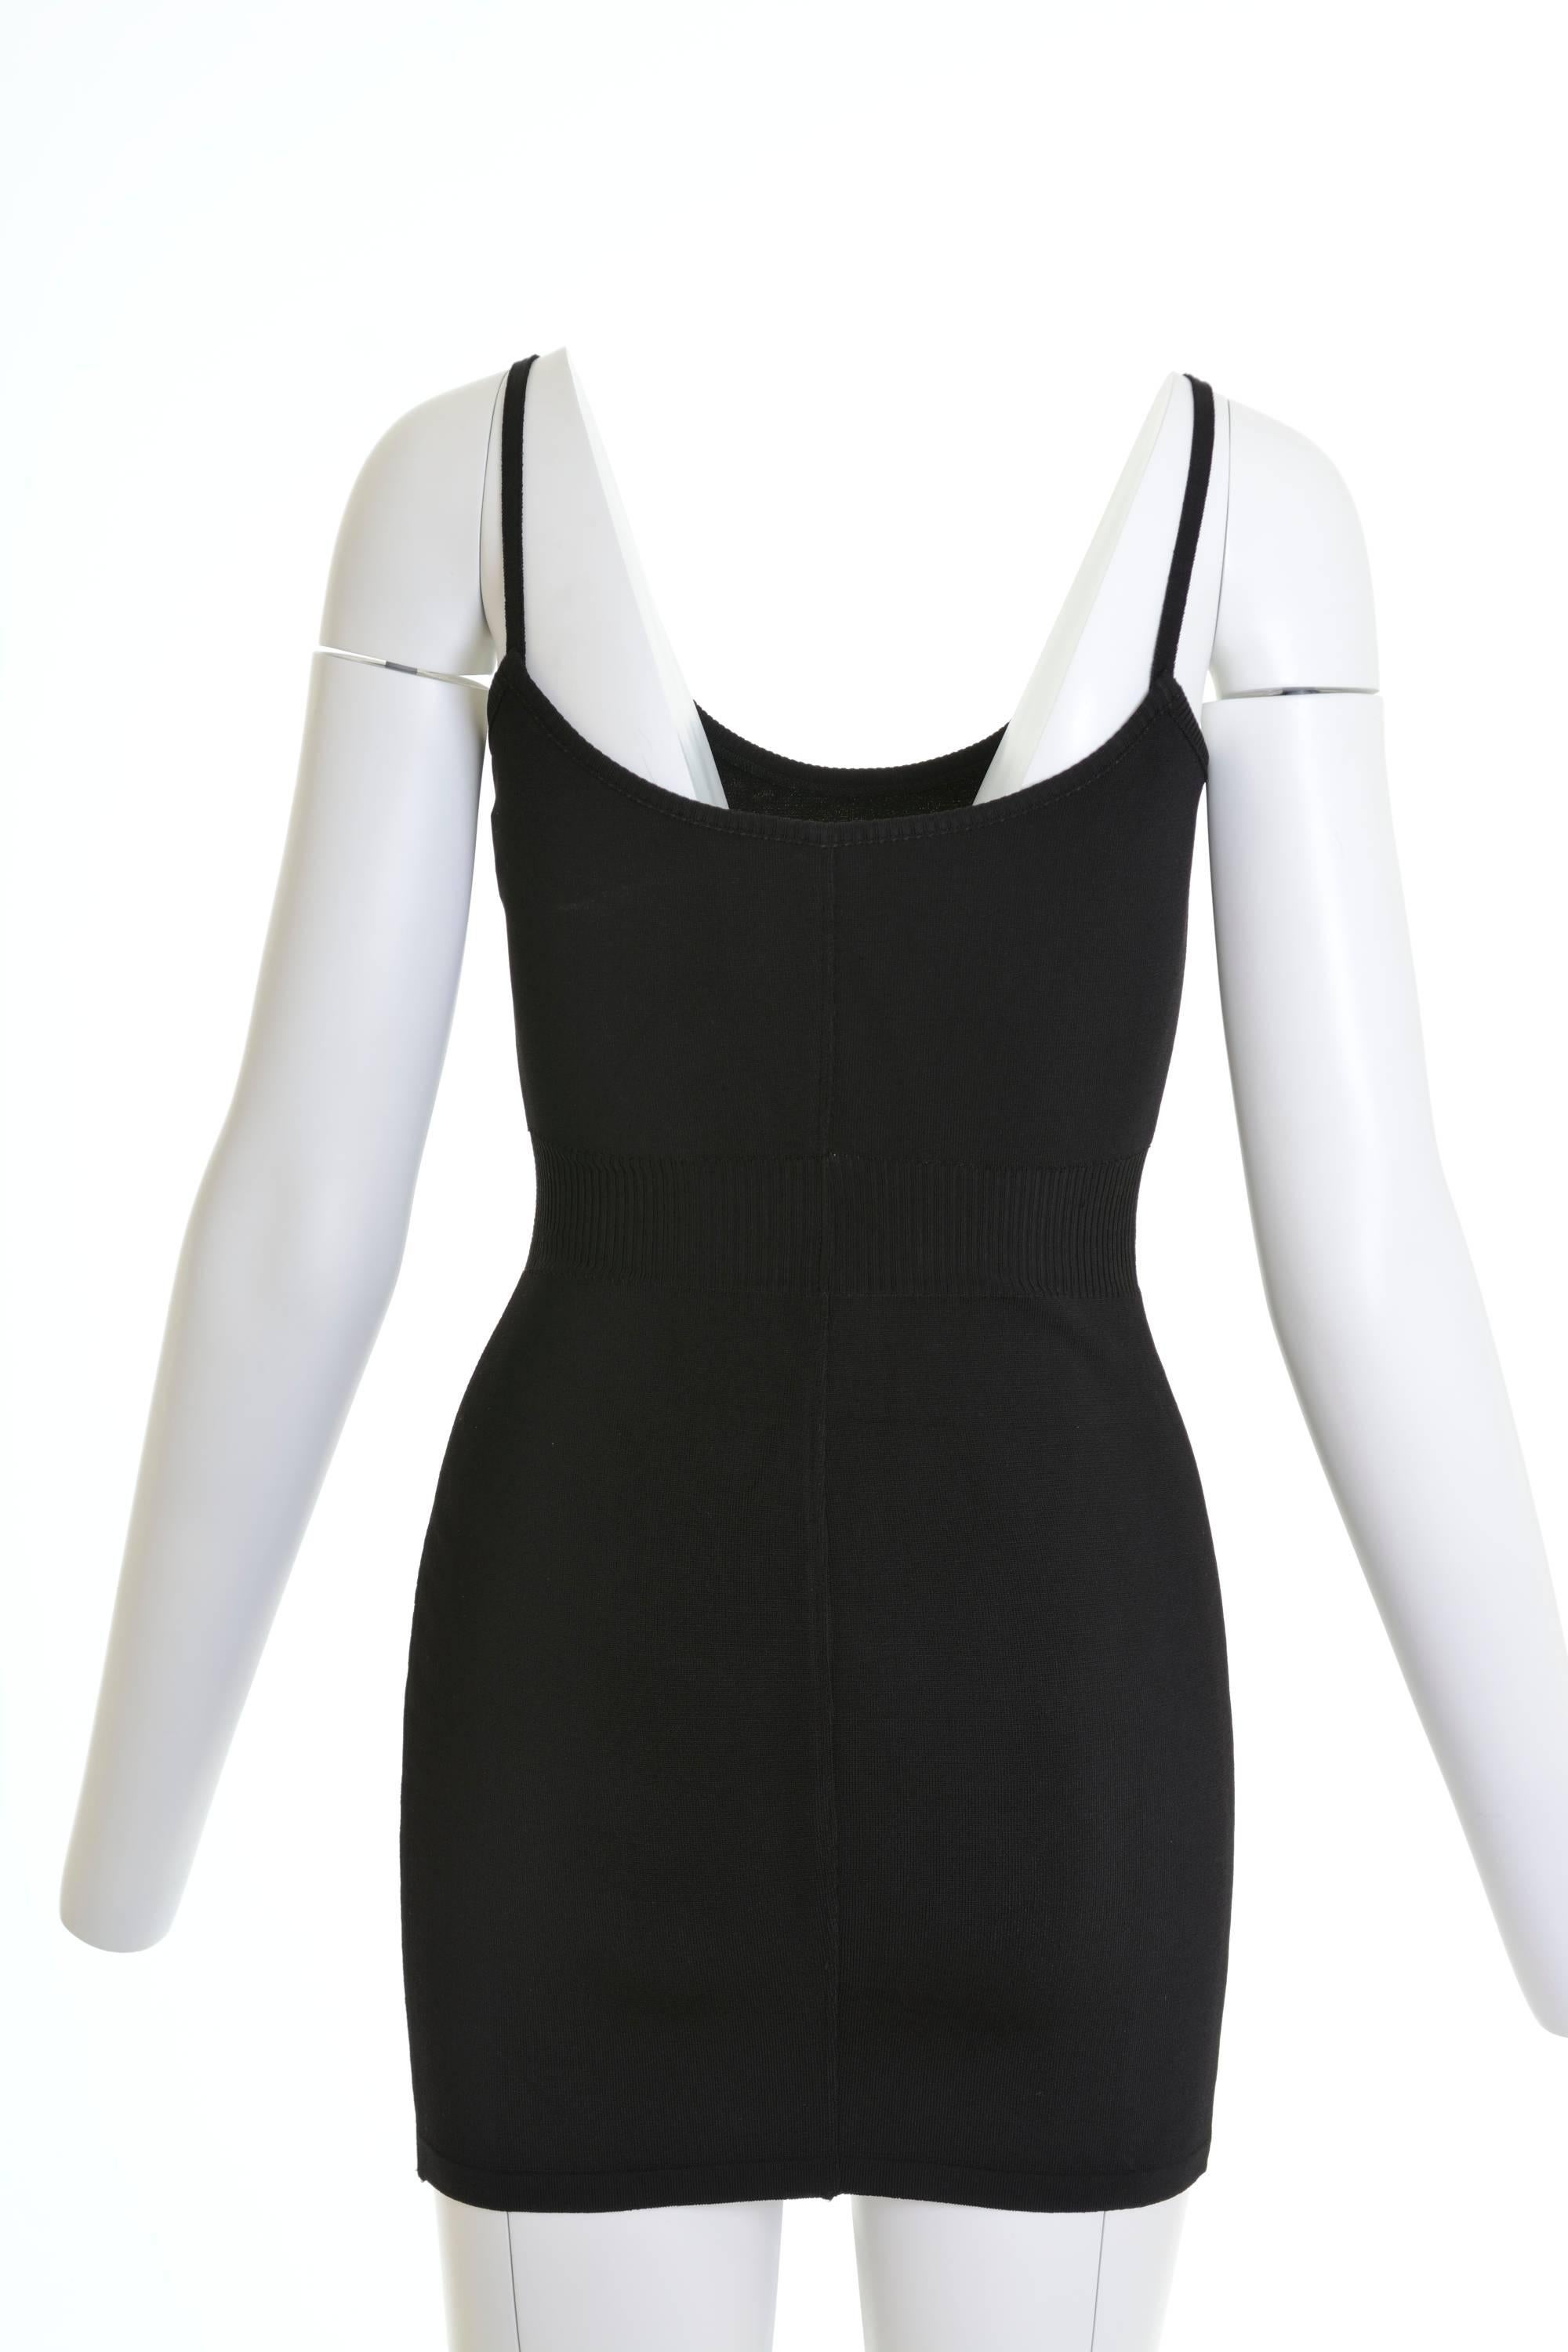 Azzedine Alaïa mini dress in a black viscose stretch fabric, with typical Alaïa's signature body. Spaghetti straps and pencil skirt.

Very good vintage condition

Label: Alaïa-Paris (Made in Italy)
Fabric: viscose/polyamide
Colour: